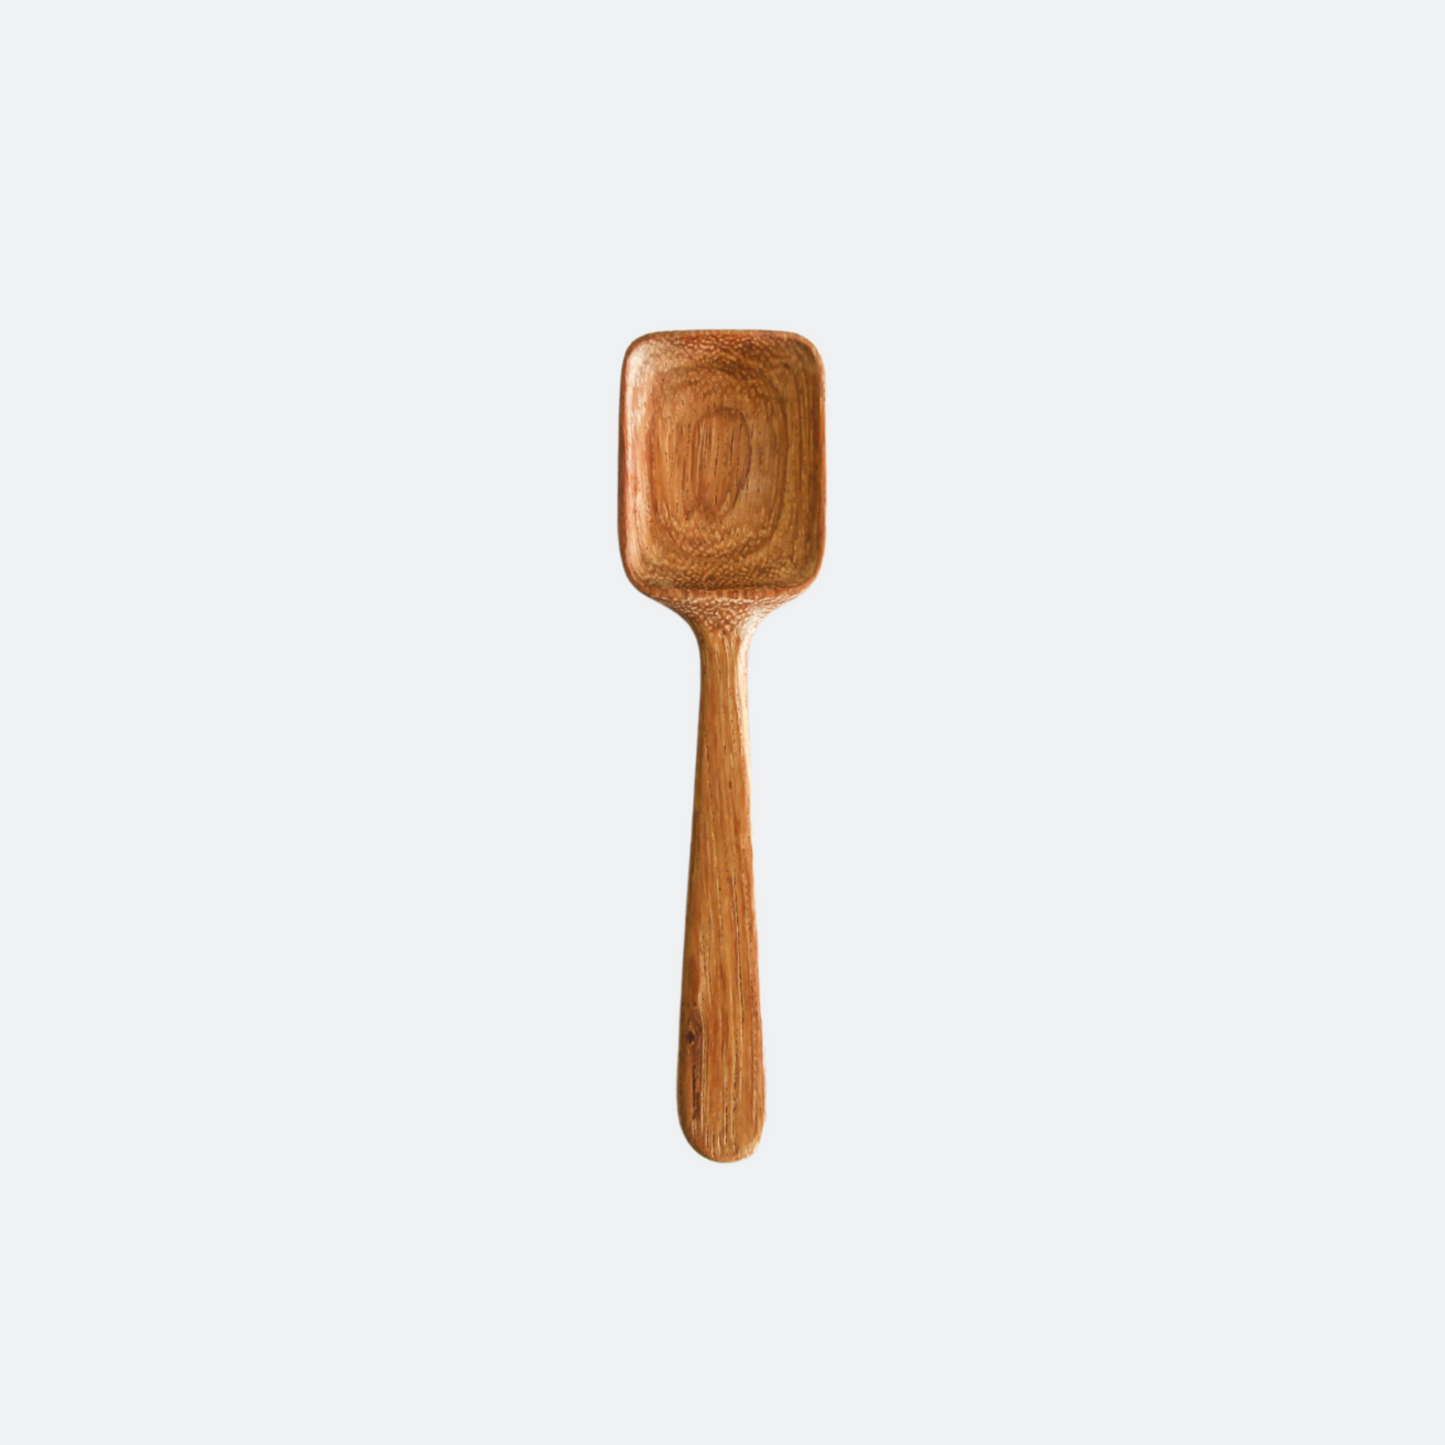 Hand-Carved Wooden Sugar Scoops - Measuring Spoon